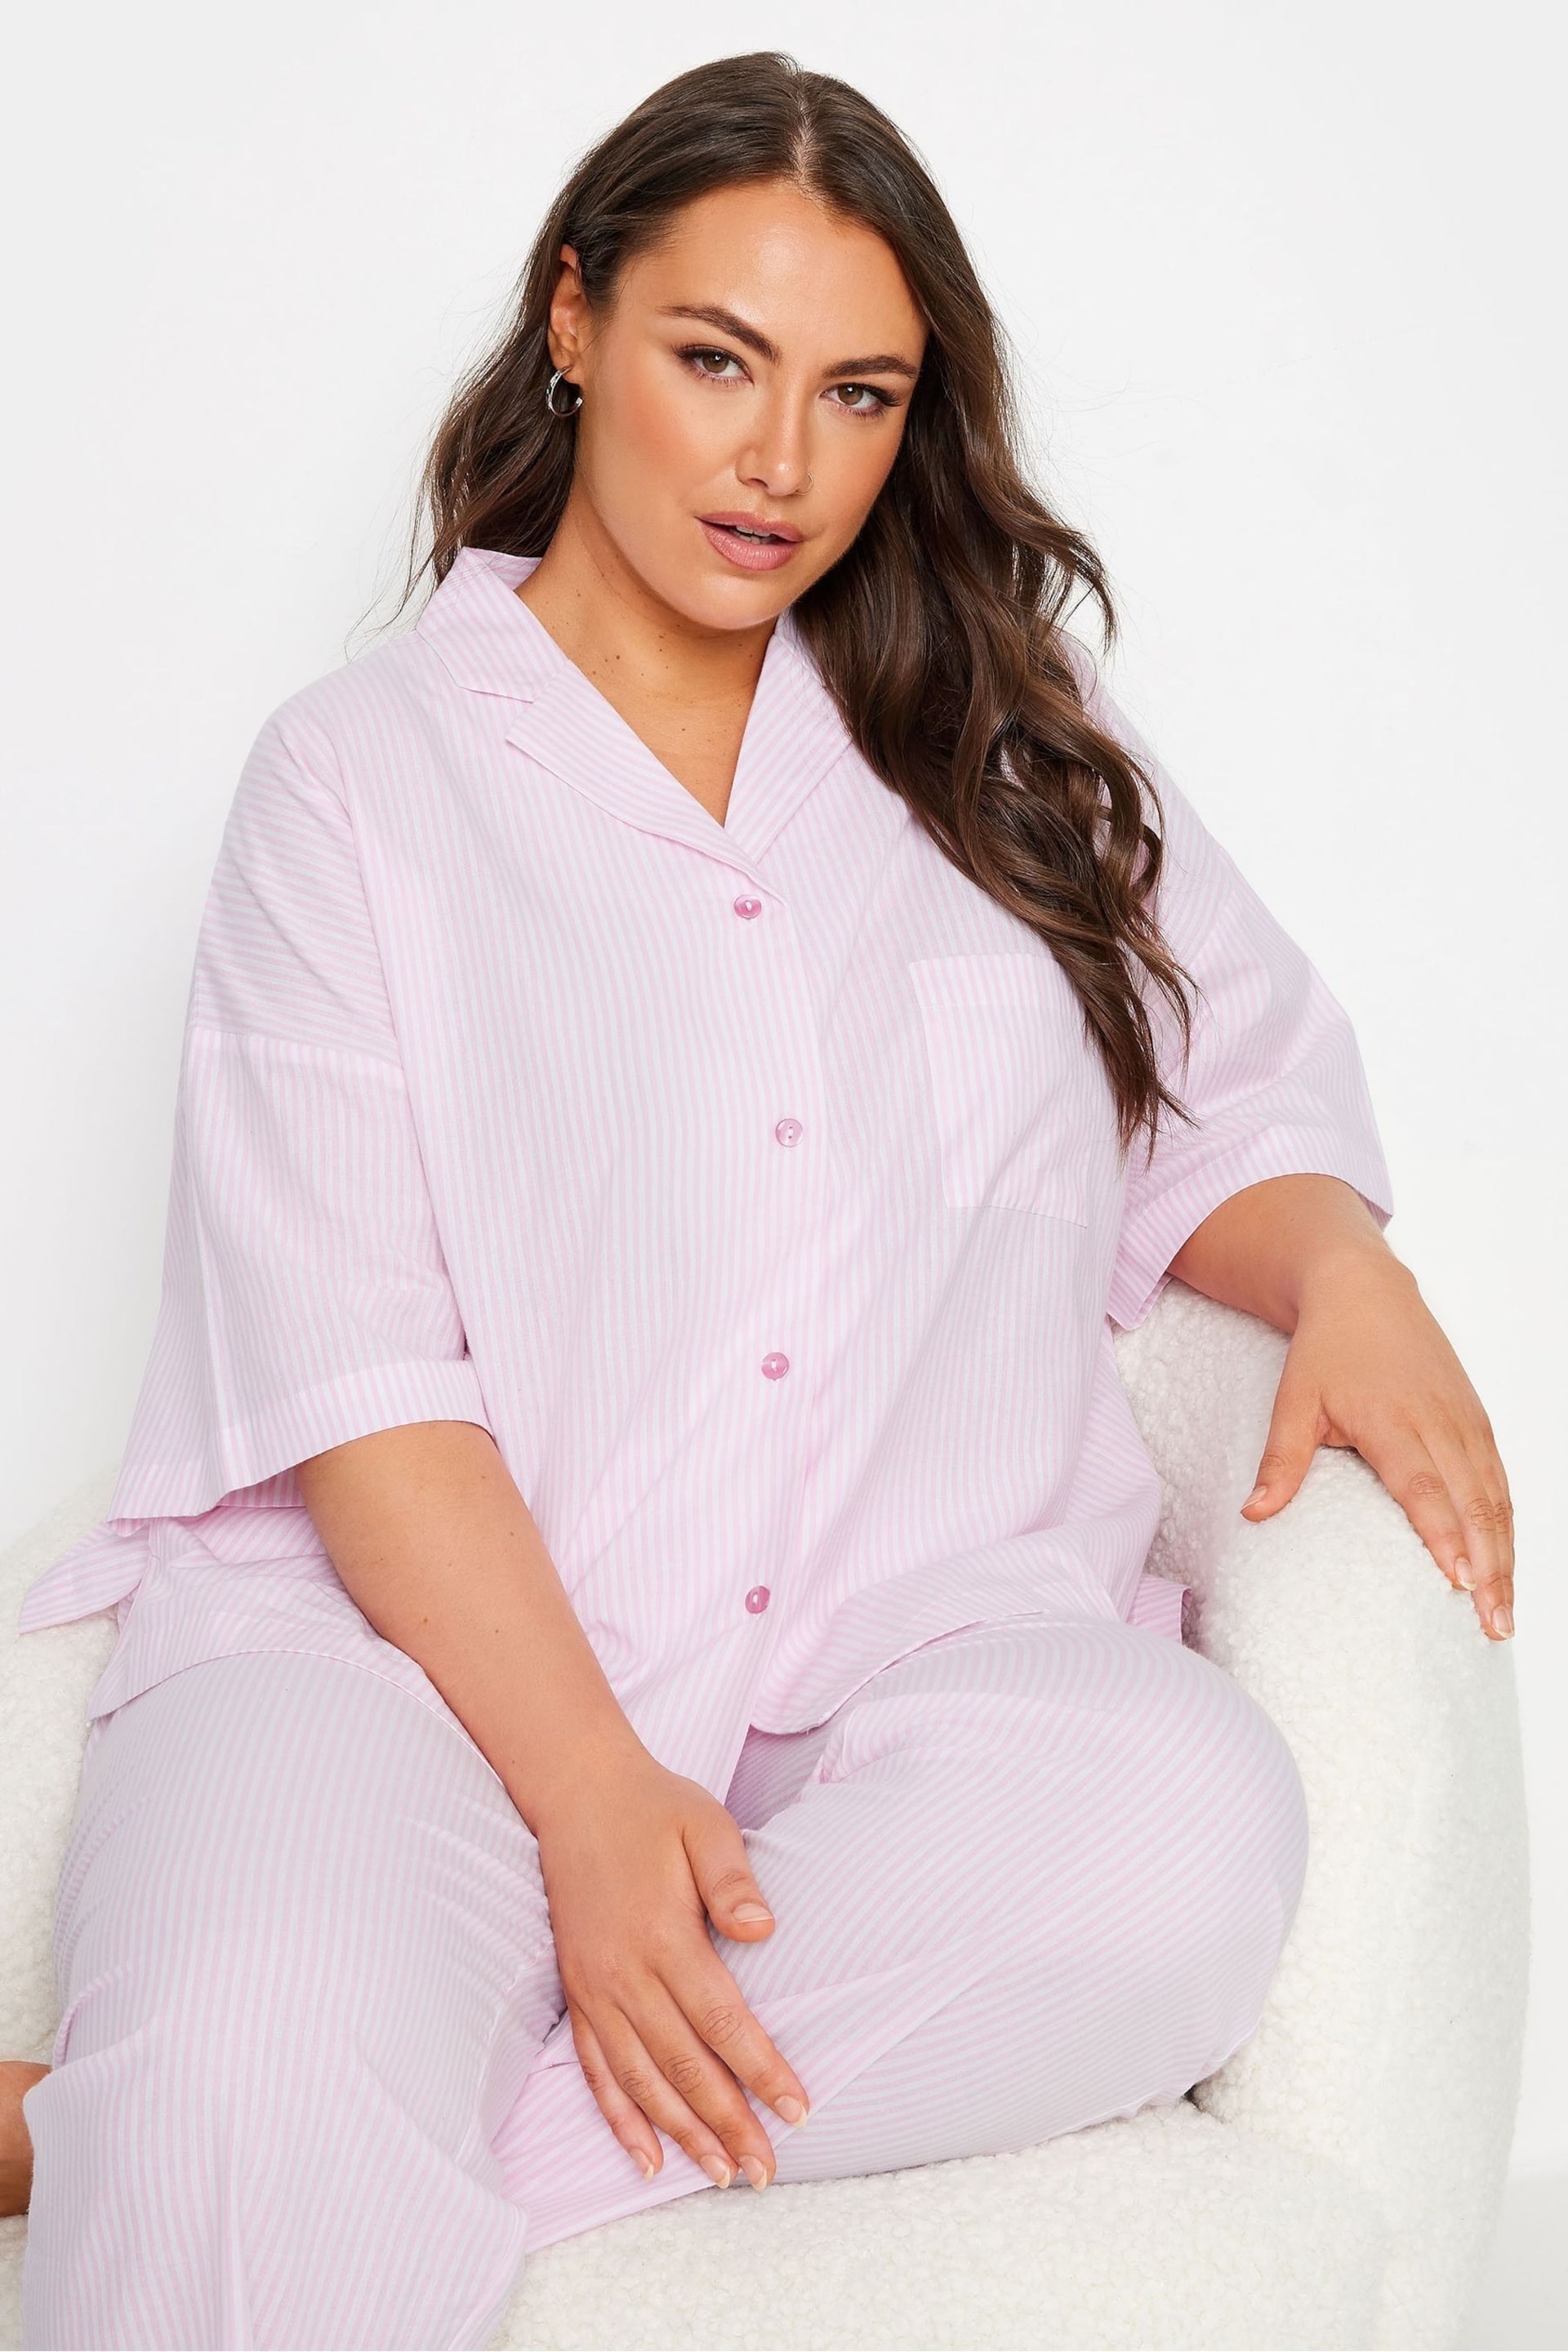 Yours Curve Pink Boyfriend Woven Stripe Shirt - Image 1 of 5